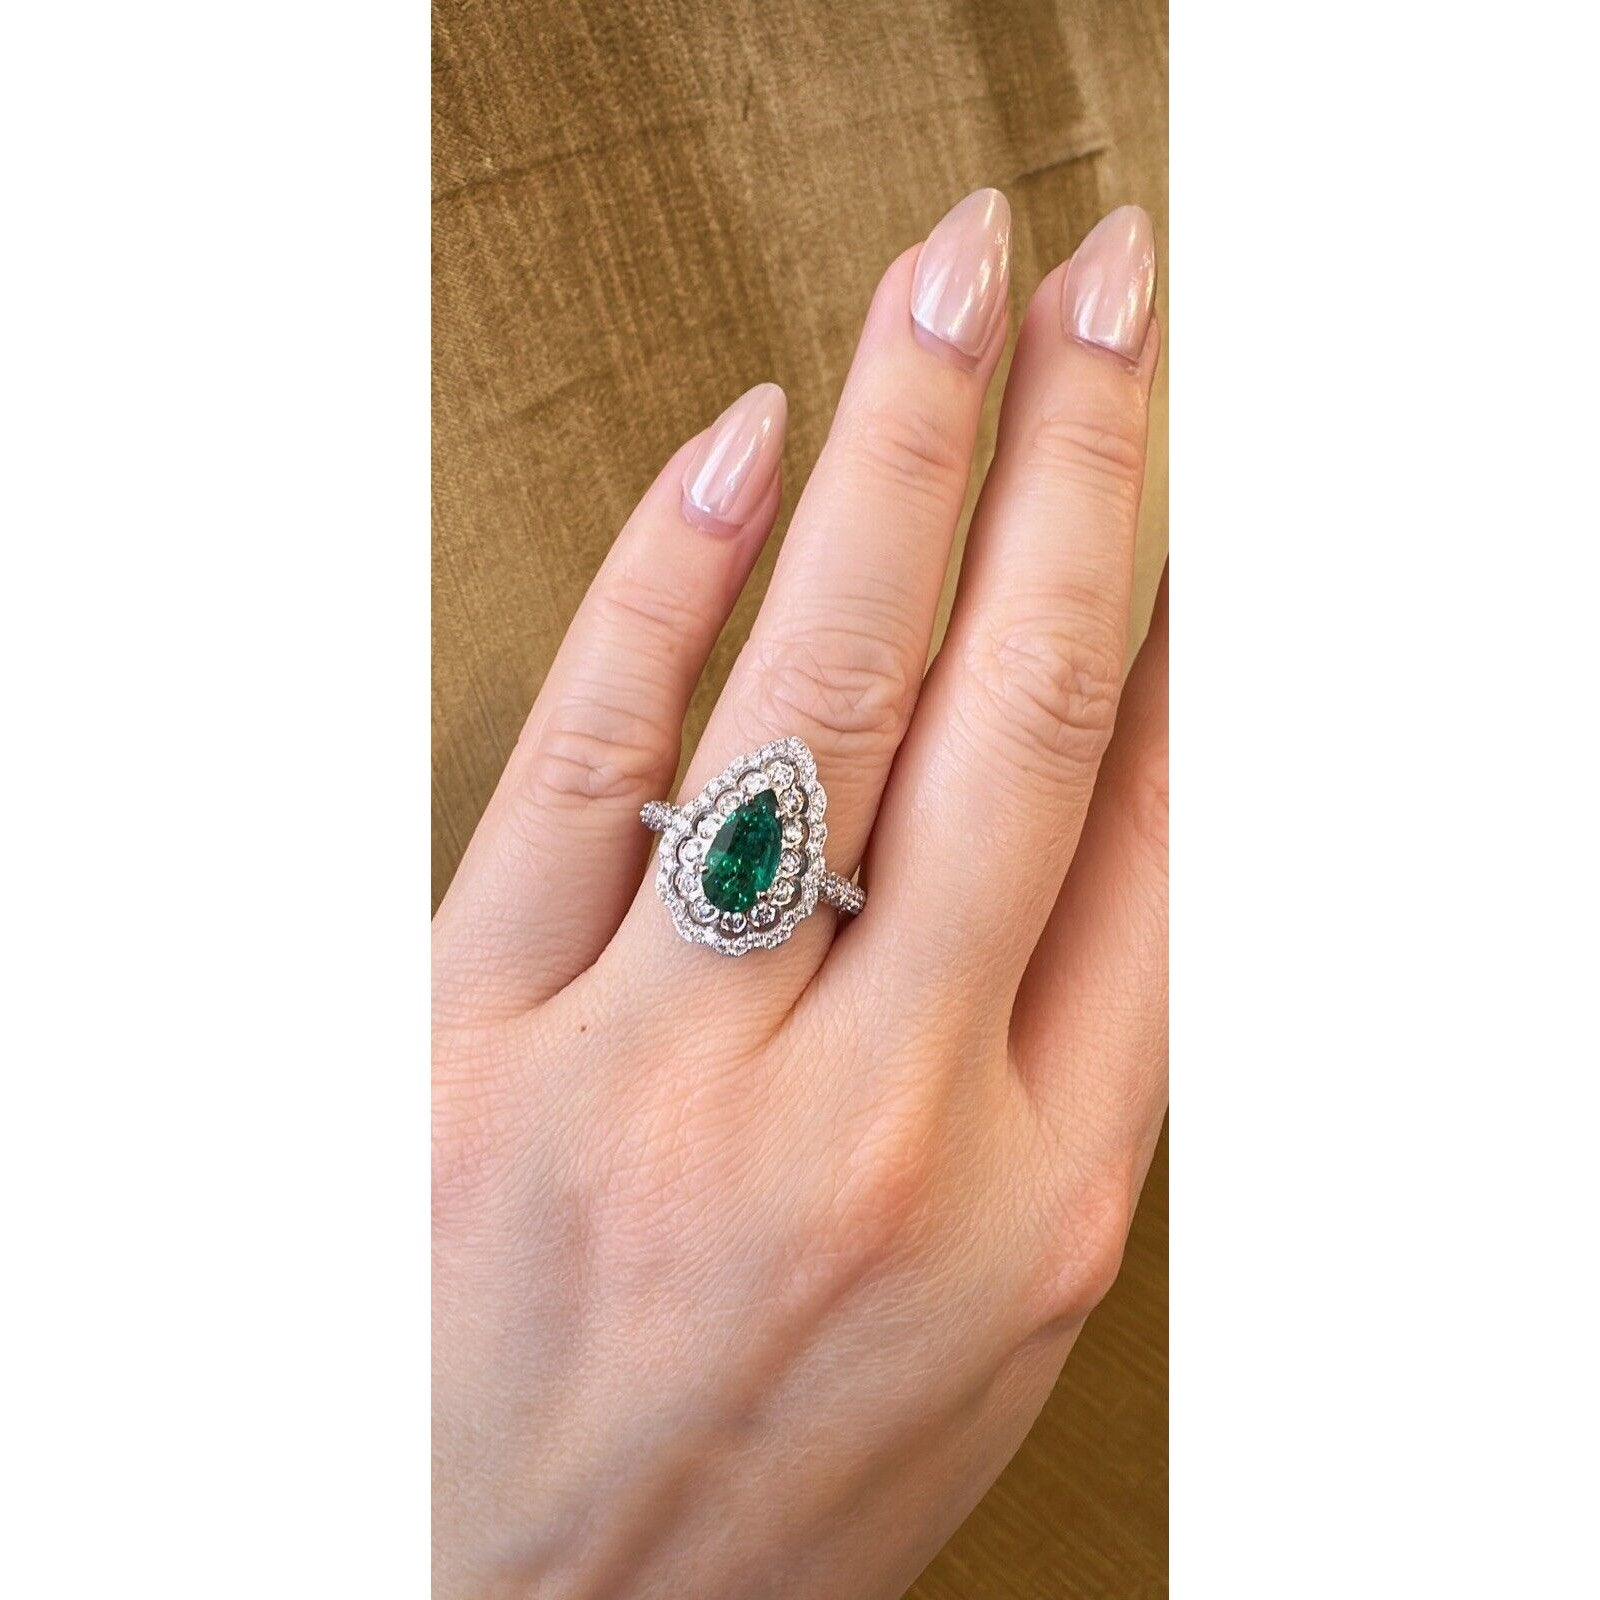 Pear Shaped Emerald and Diamond Ring in 18k White Gold - HM2560B